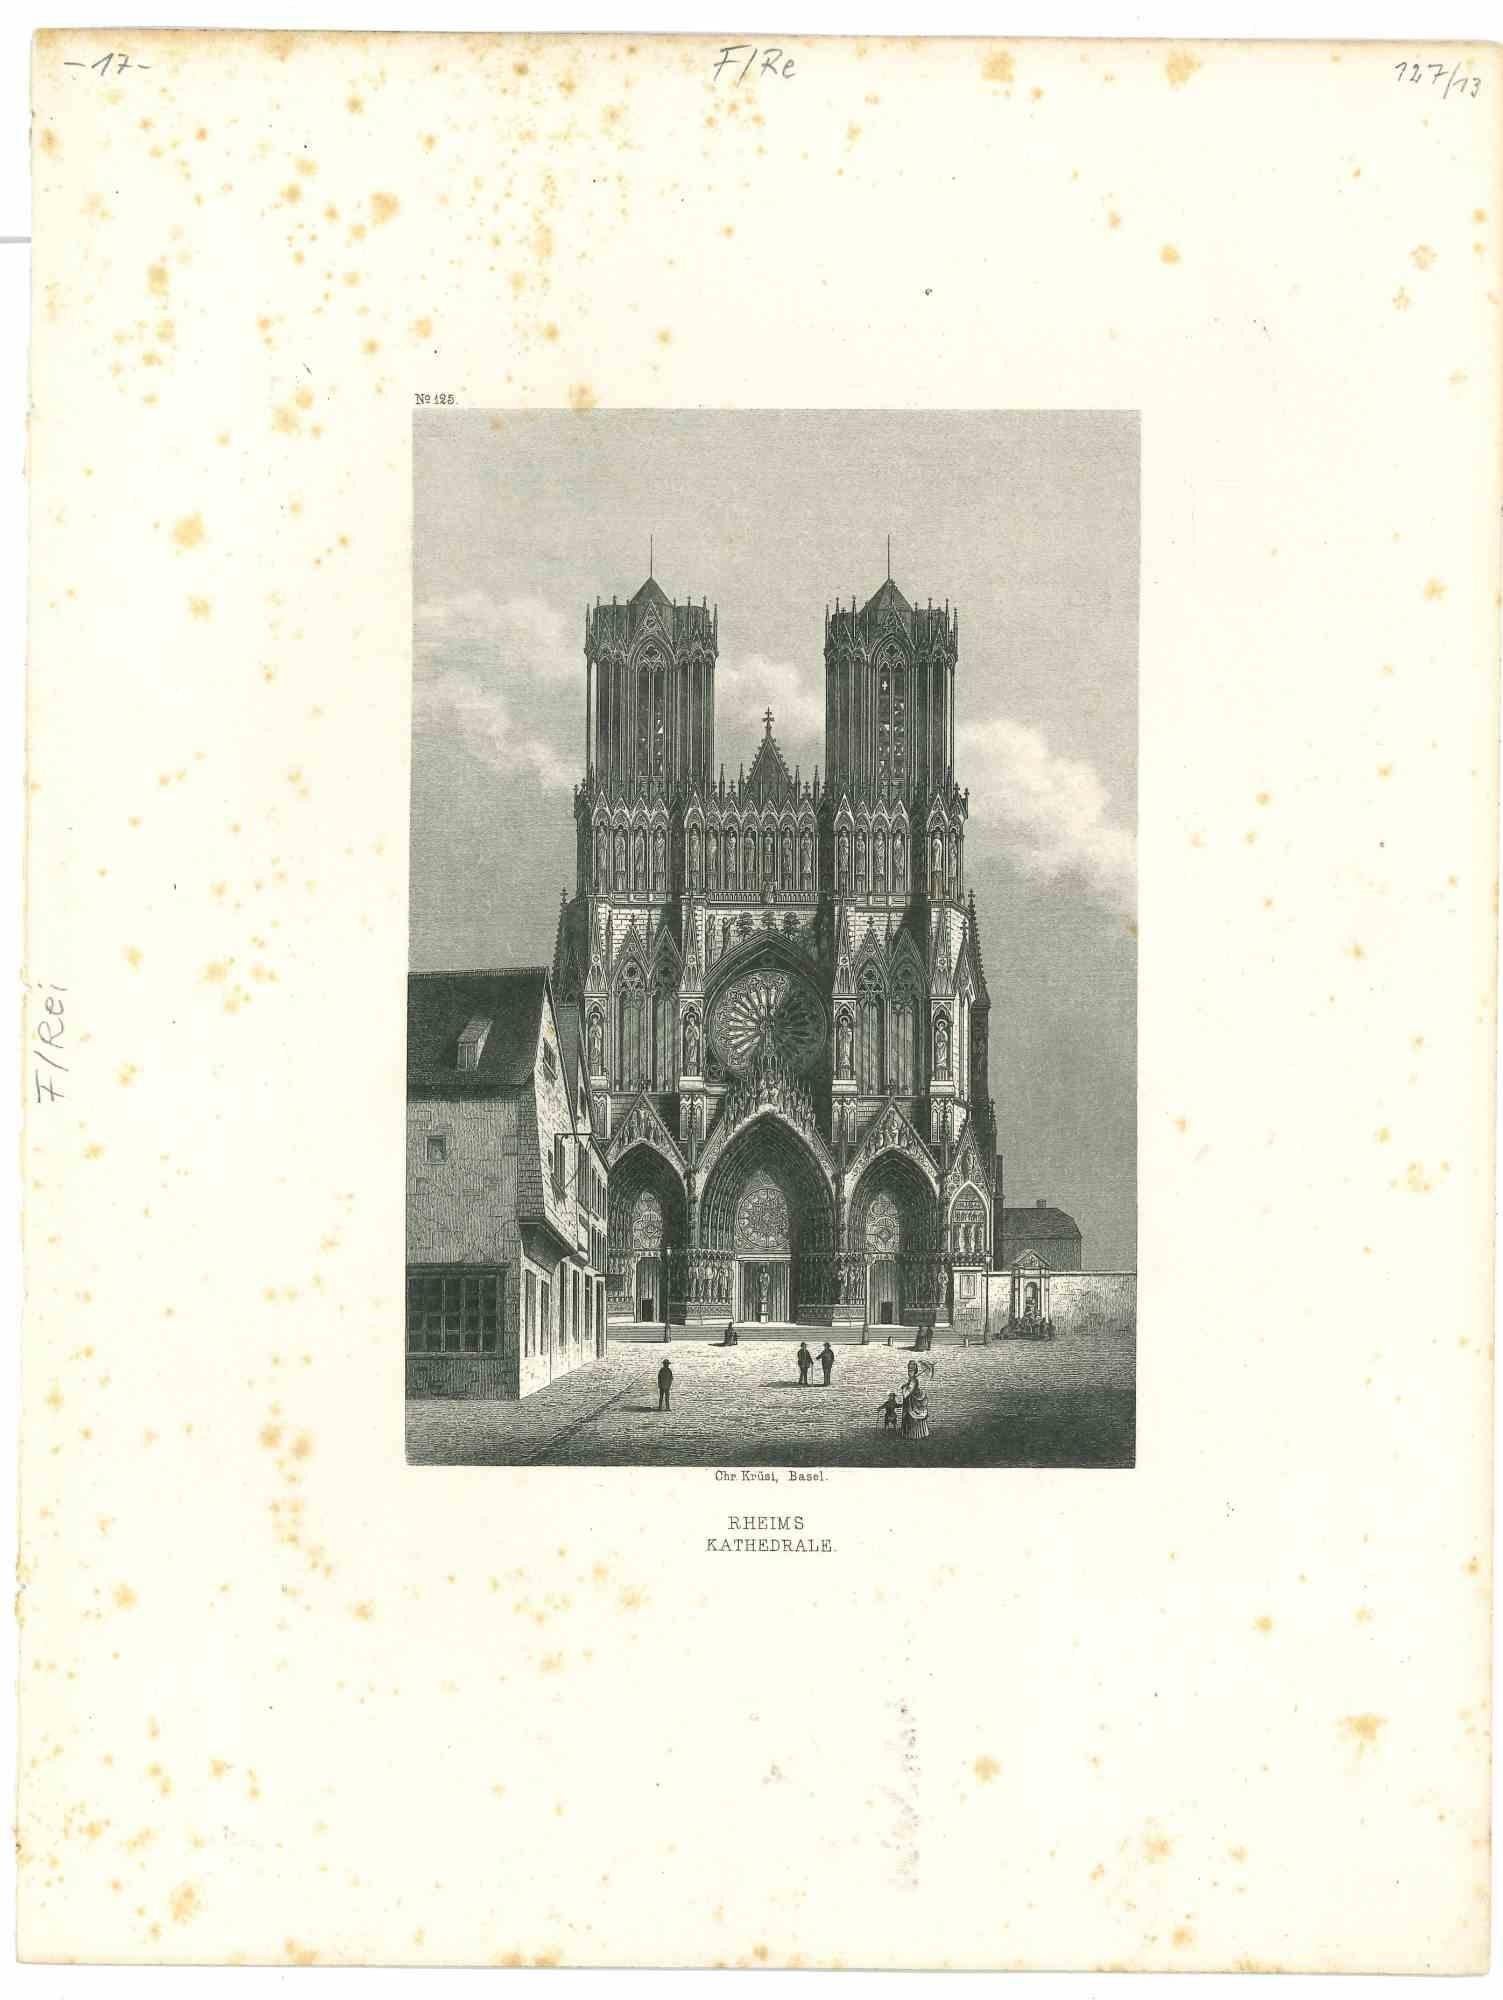 Unknown Figurative Print - Reims Kathedrale - Original Lithograph - Mid-19th Century